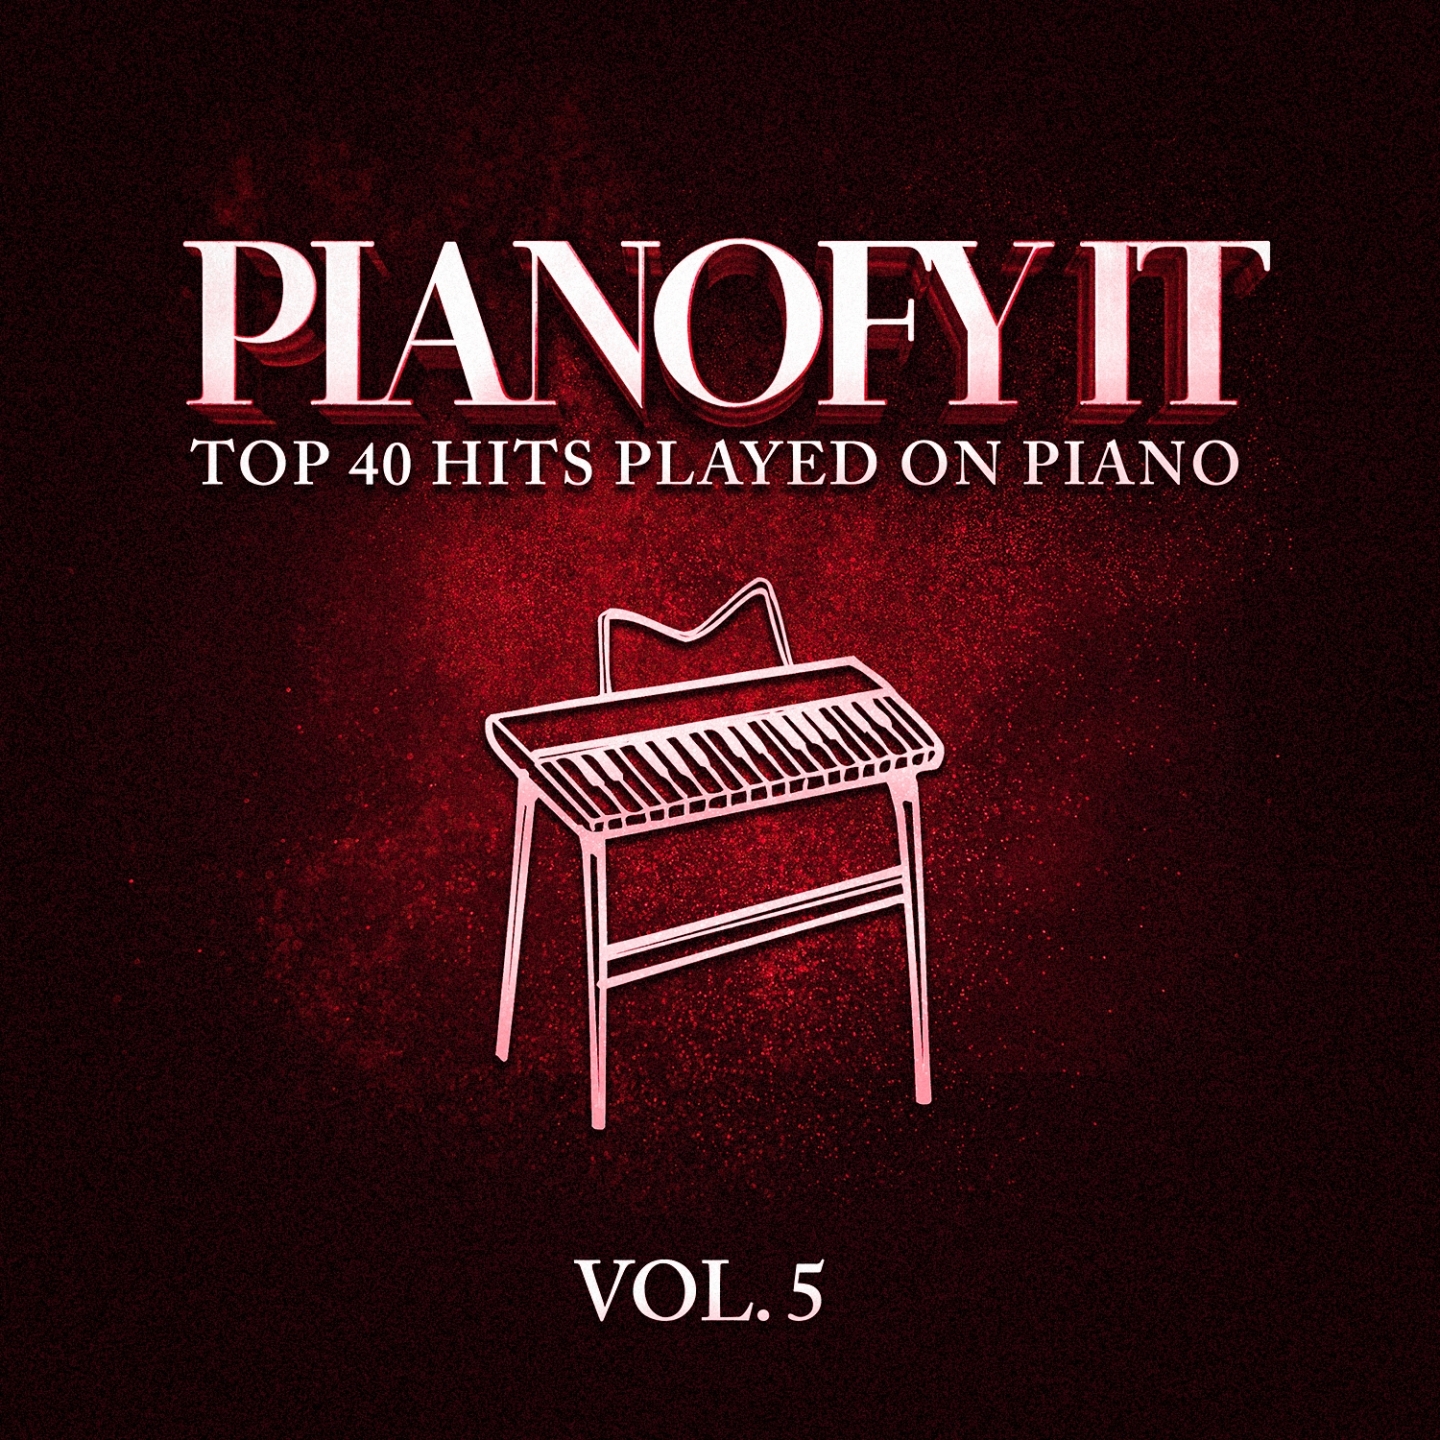 Pianofy It, Vol. 5 - Top 40 Hits Played On Piano